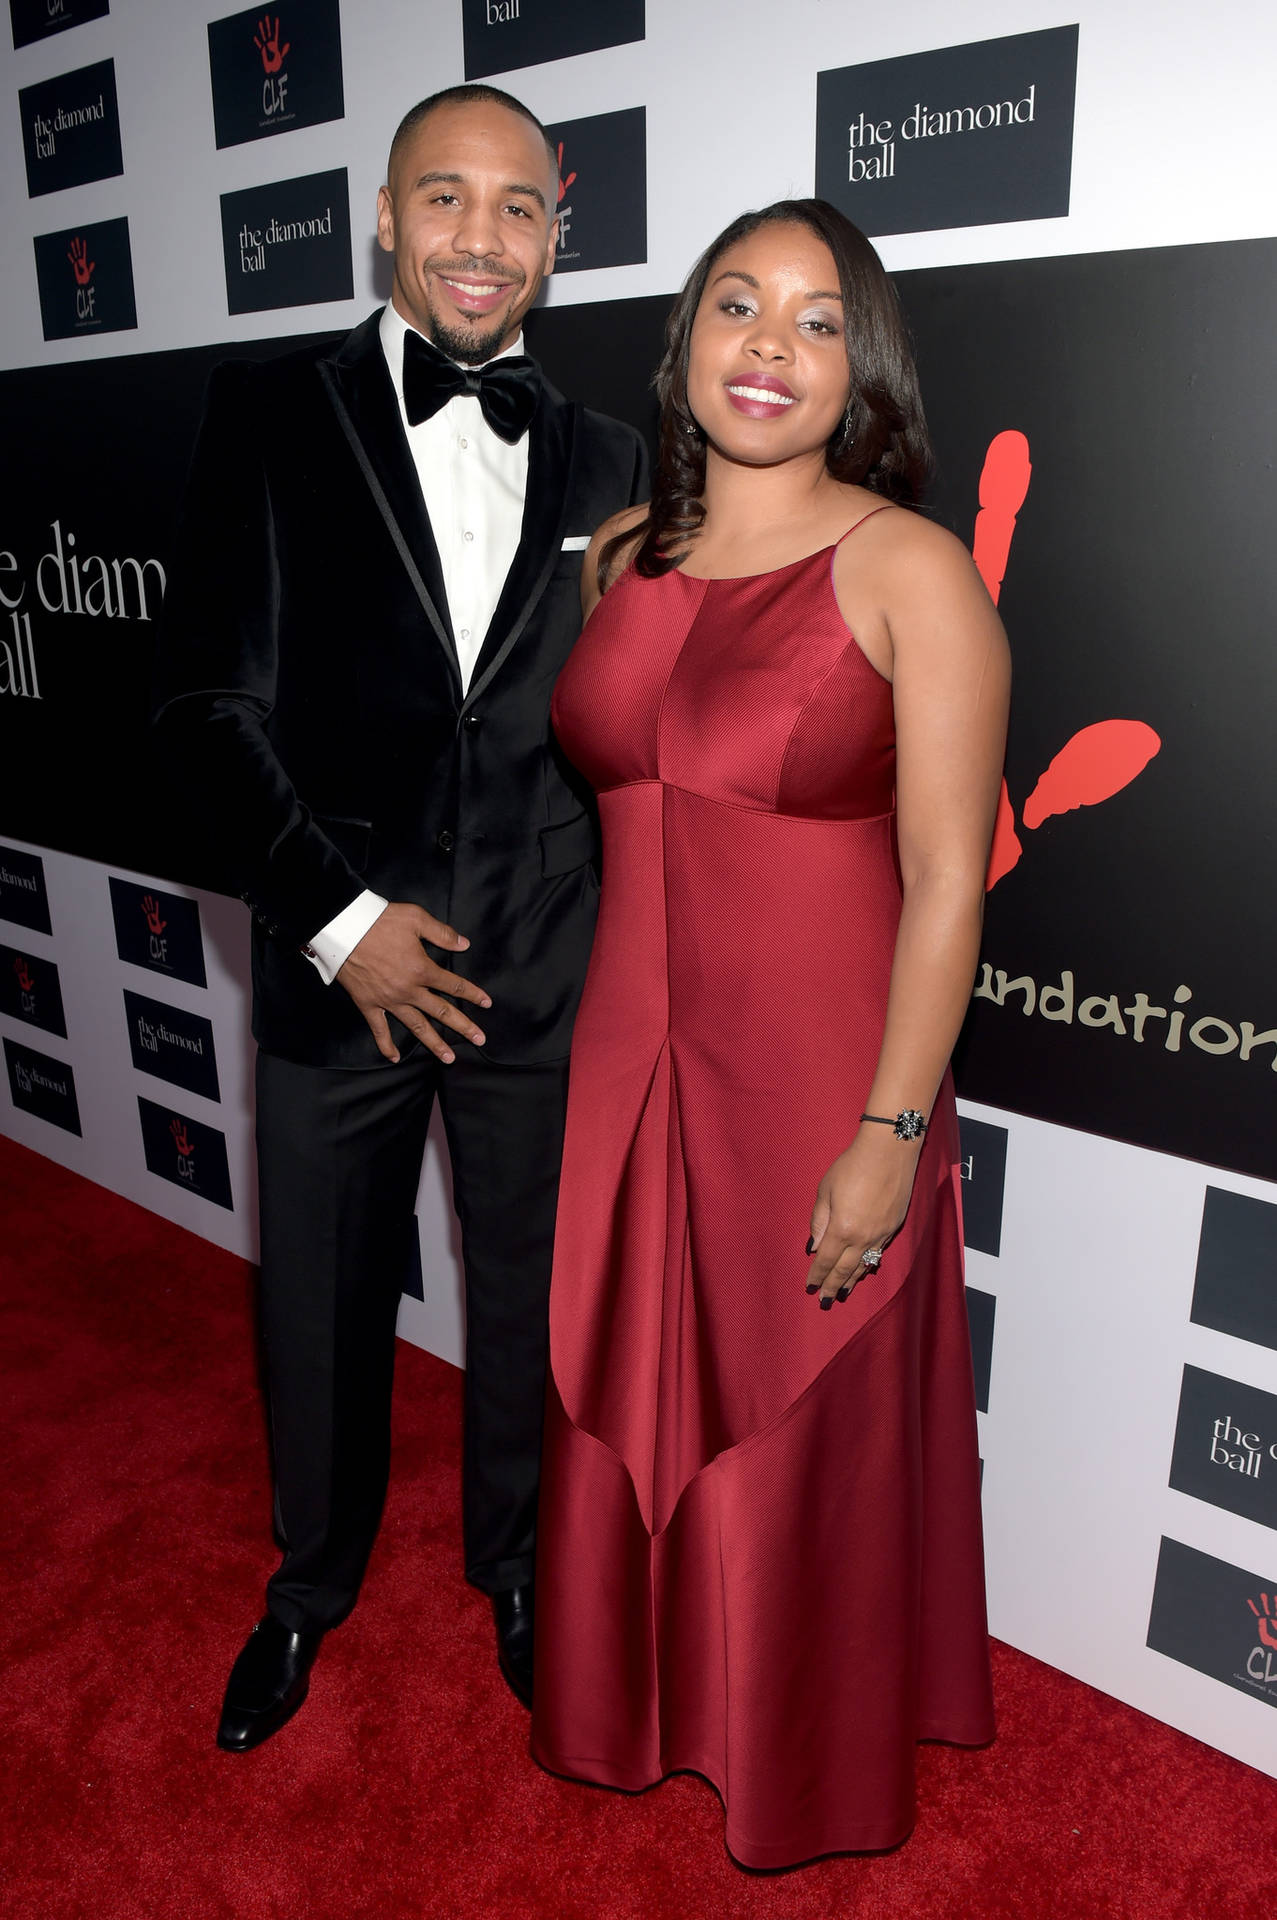 Andre Ward And His Wife At The Diamond Ball Wallpaper